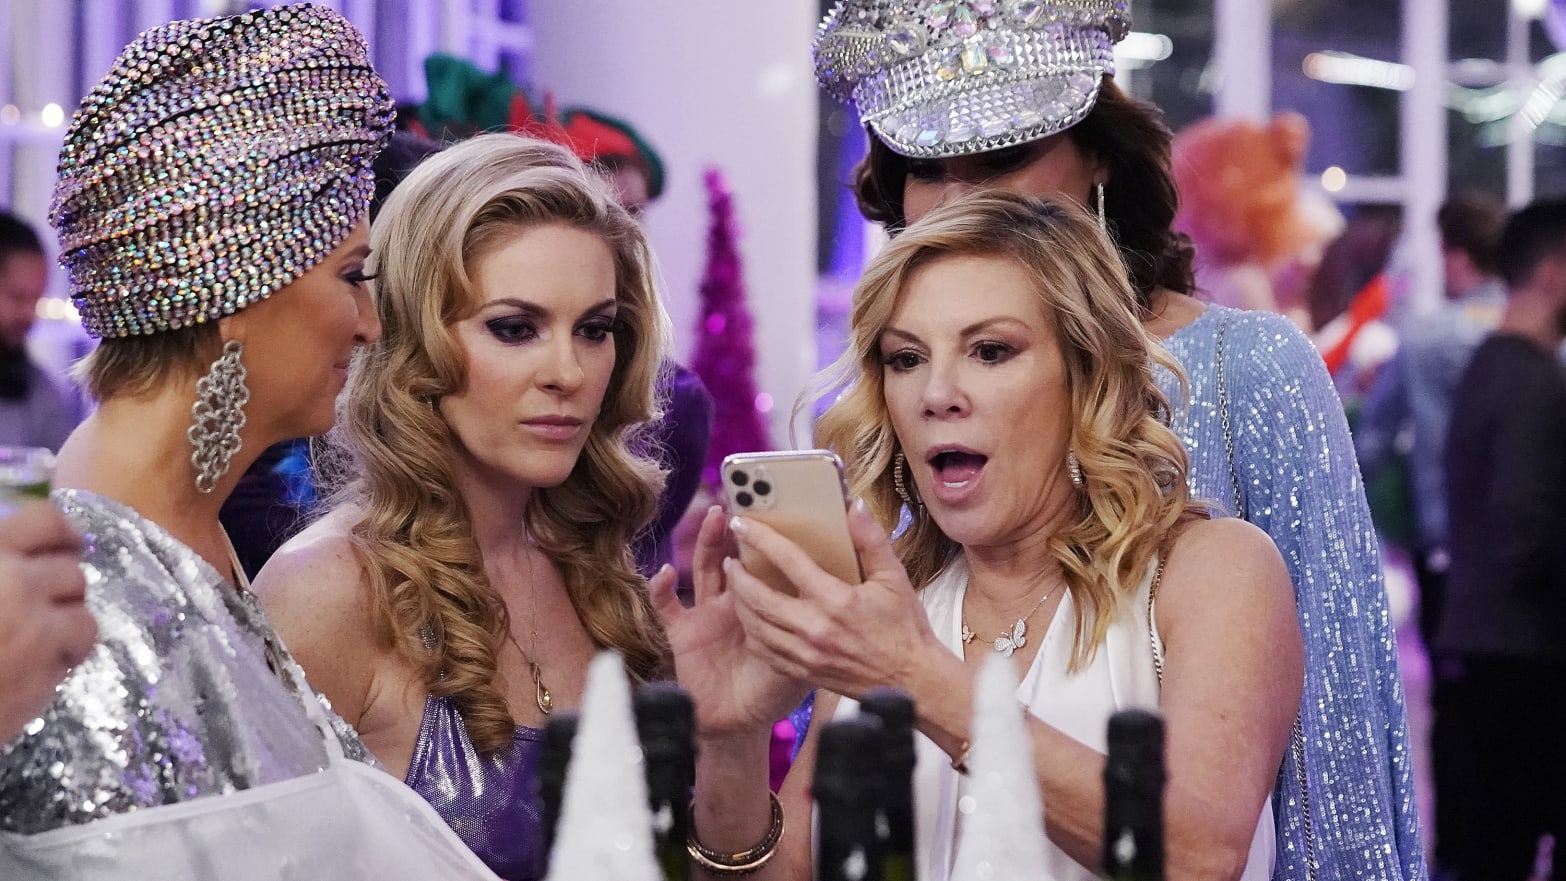 Ramona Singer looks at a phone with a shocked expression in "The Real Housewives of New York"